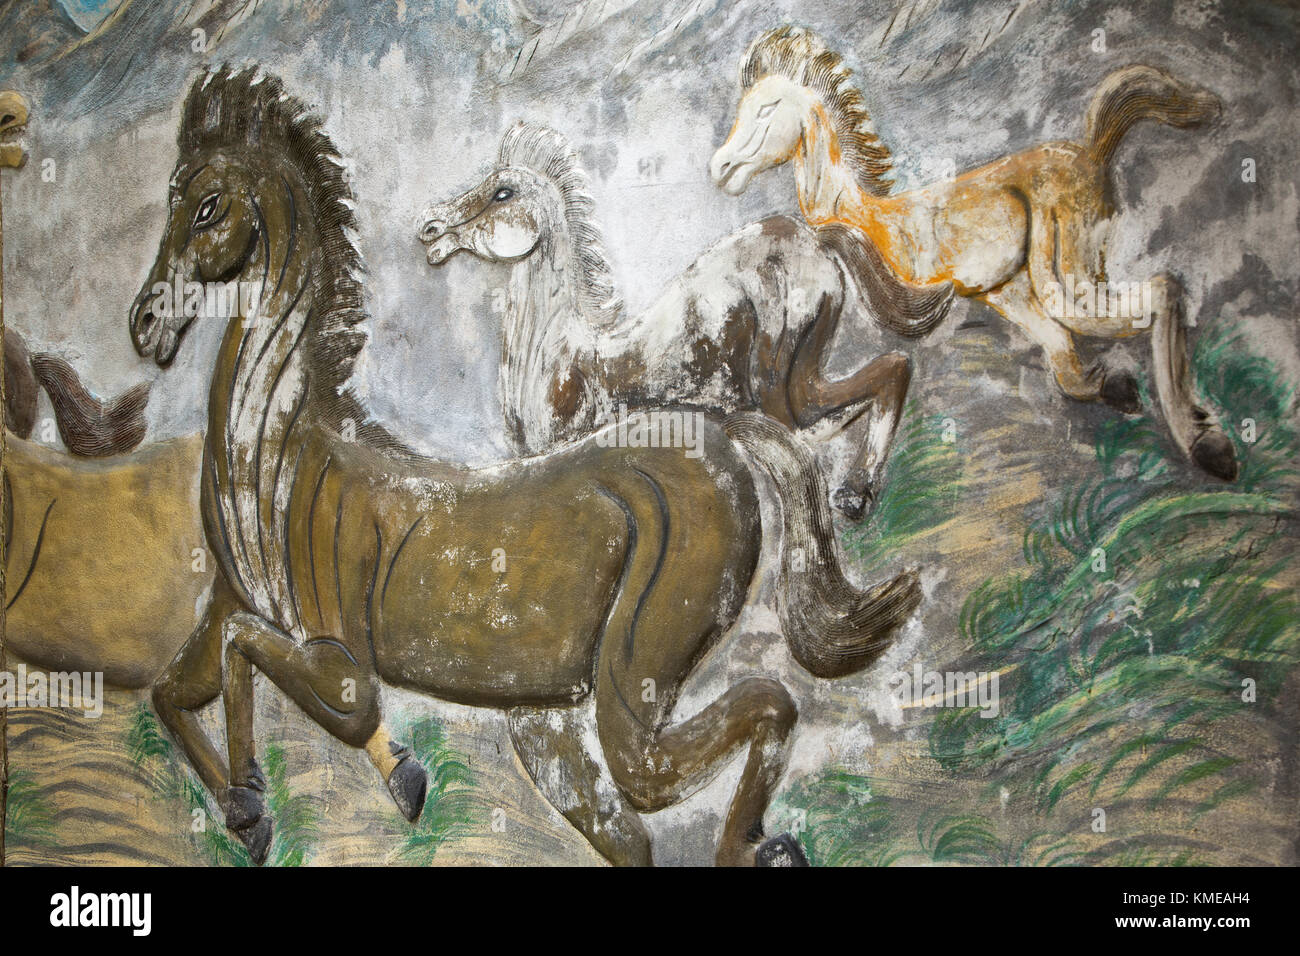 Painting on structure,  artist rendition,  herd of galloping horses in nature, Vietnam. Stock Photo